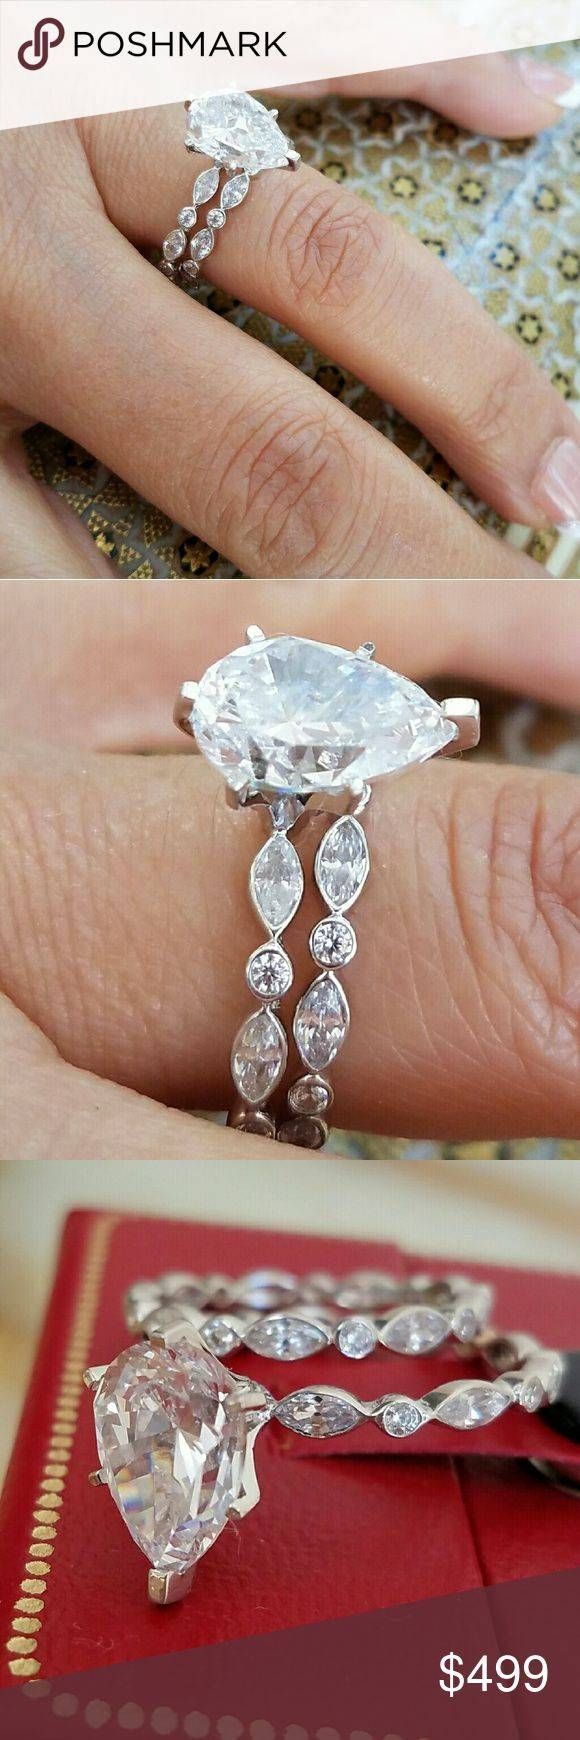 Best 20+ Eternity Wedding Bands Ideas On Pinterest | Engagement Inside Pear Shaped Engagement Rings With Wedding Bands (View 11 of 15)